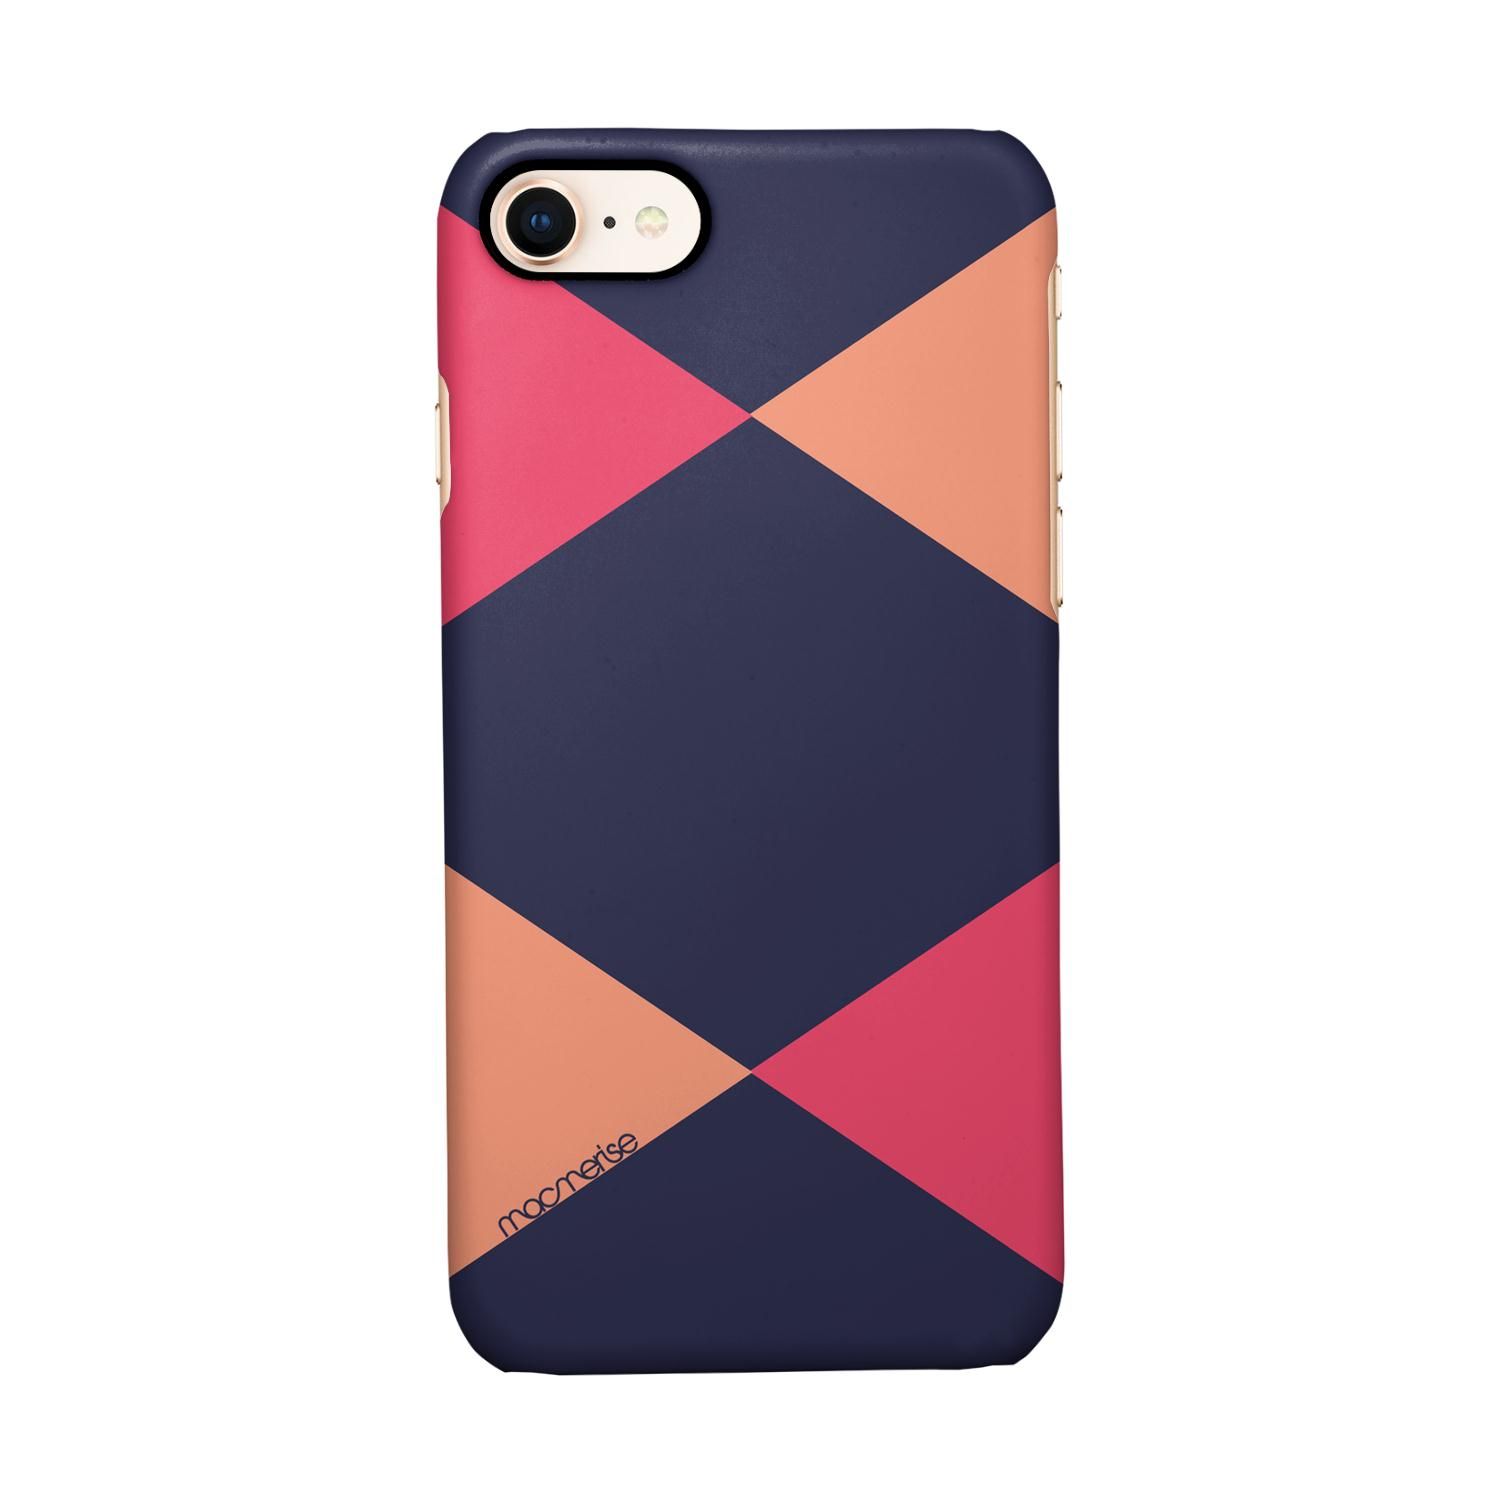 Buy Criss Cross Blupink - Sleek Phone Case for iPhone 7 Online